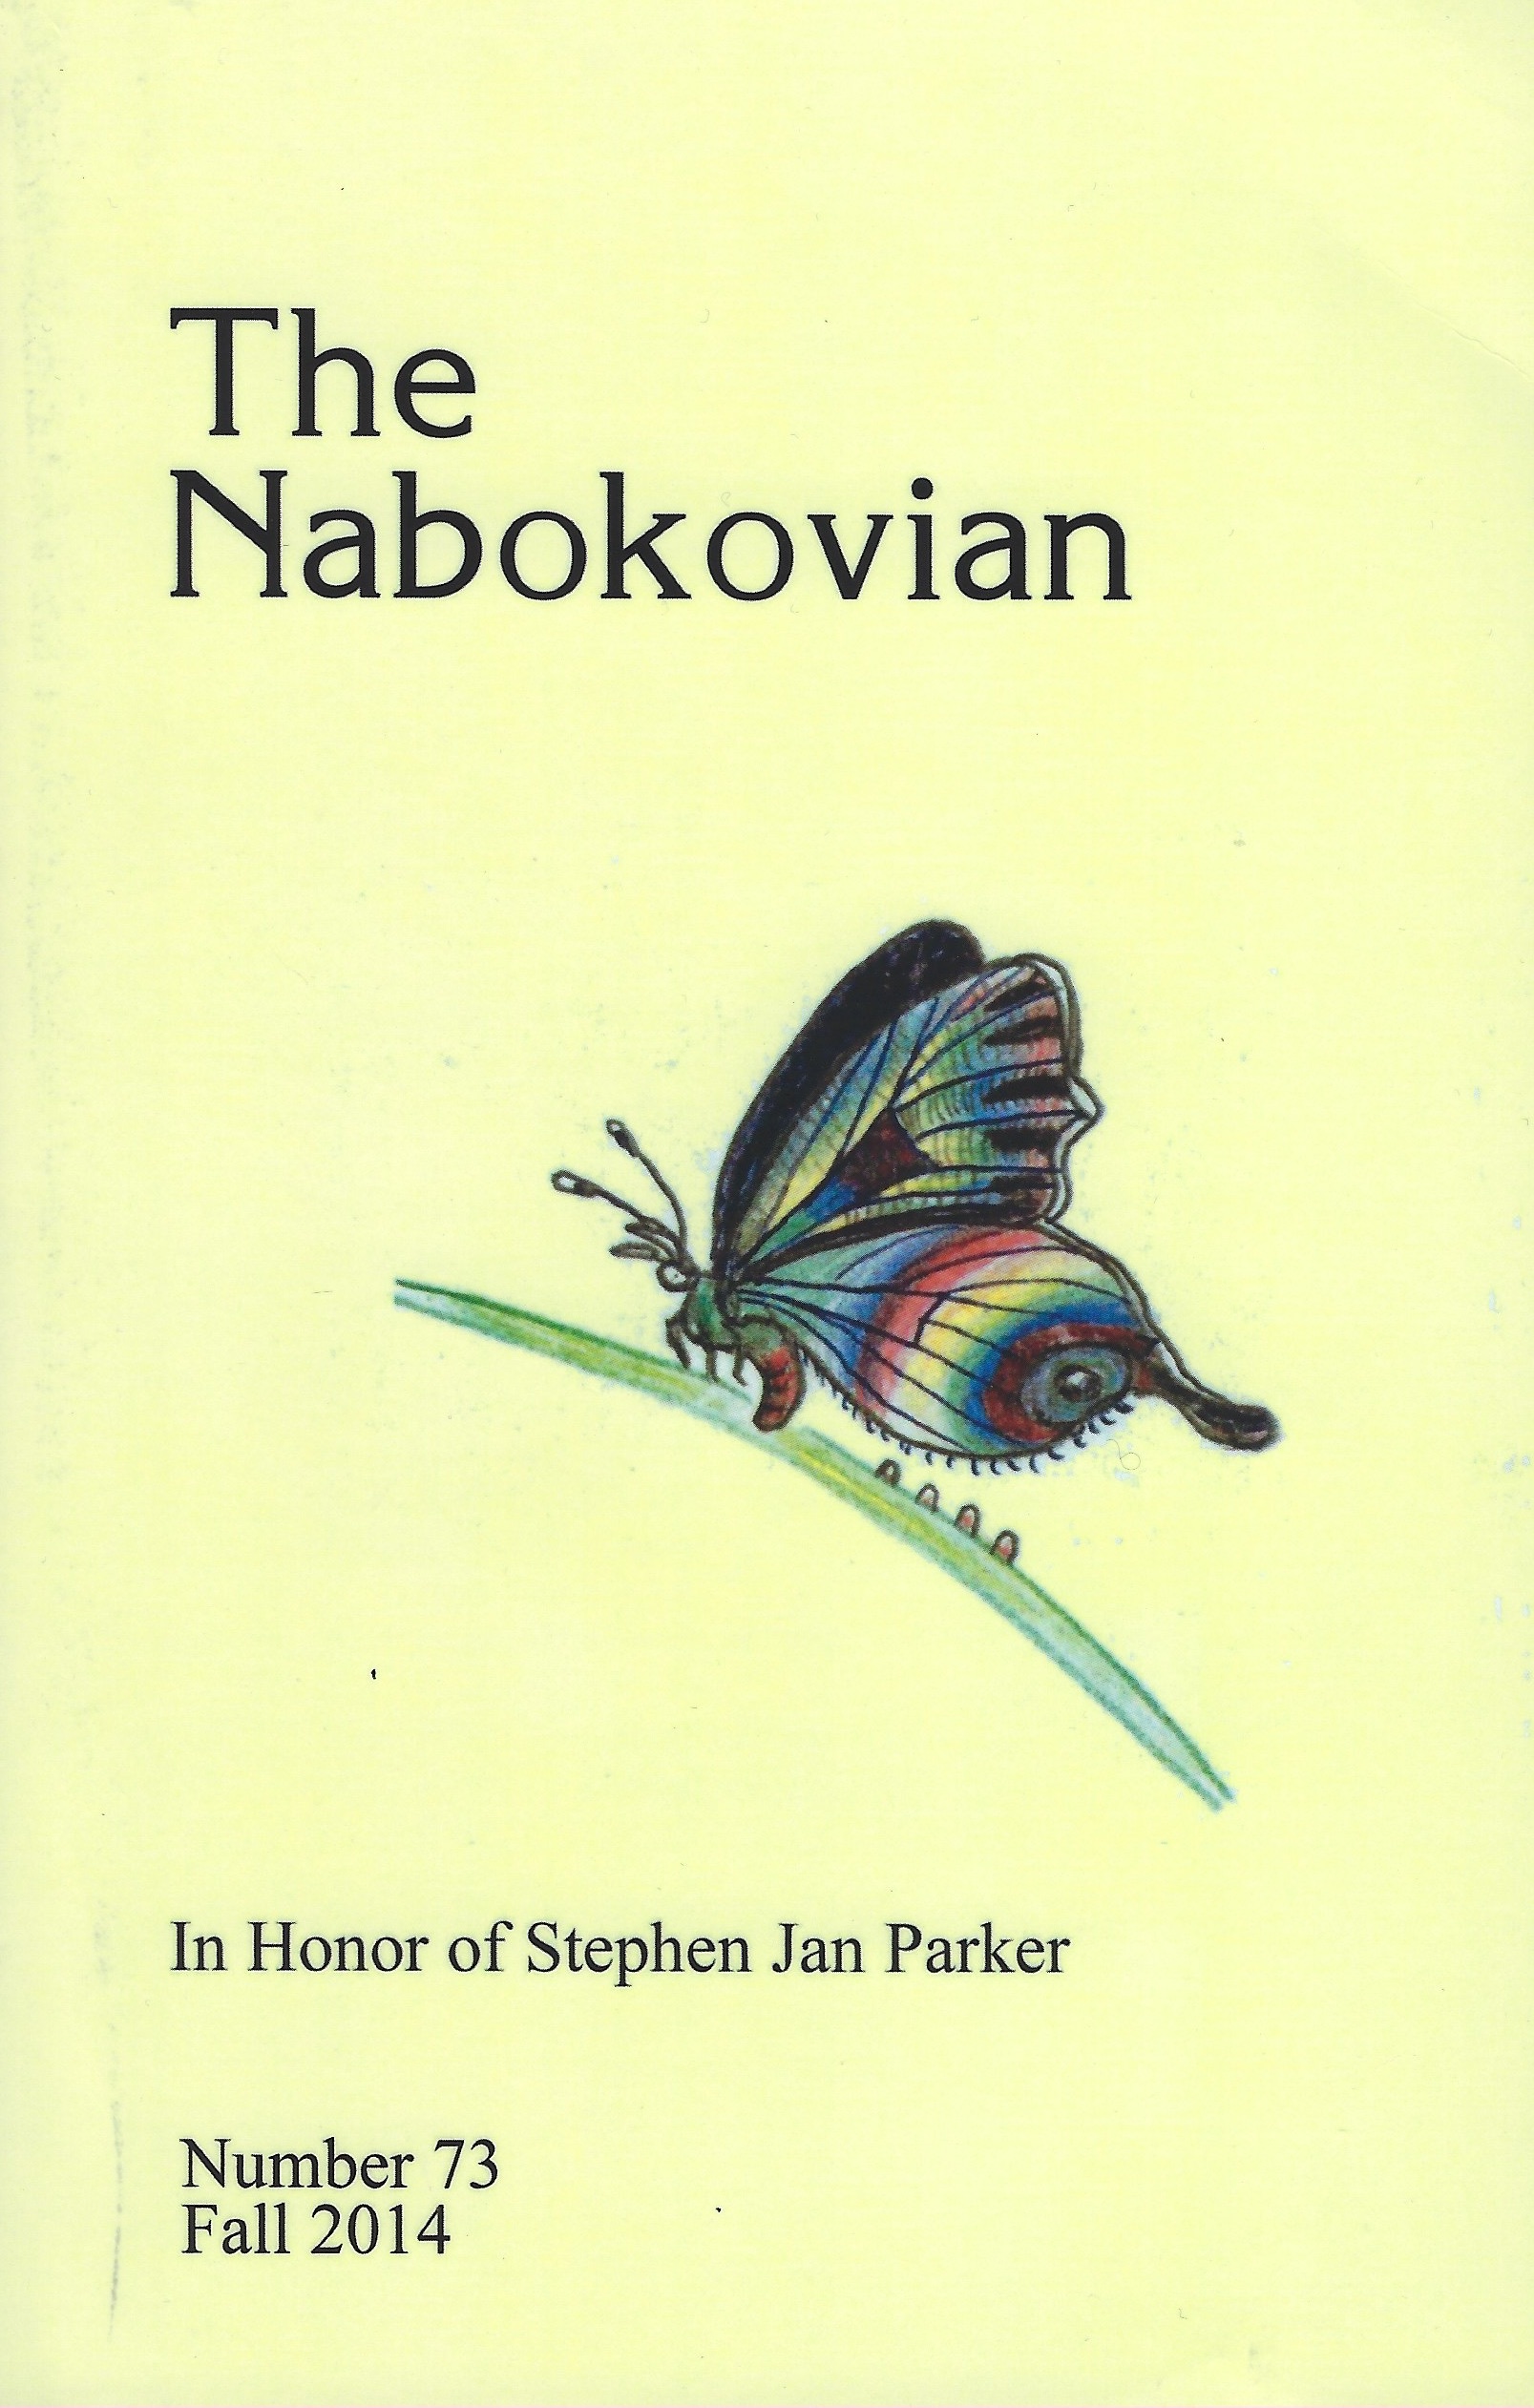 The cover of The Nabokovian Number 73, Fall 2014, with Nabokov's 1969 drawing for Véra of the invented butterfly Paradisia radugaleta, an image that had adorned the cover of the Nabokovian since number 5